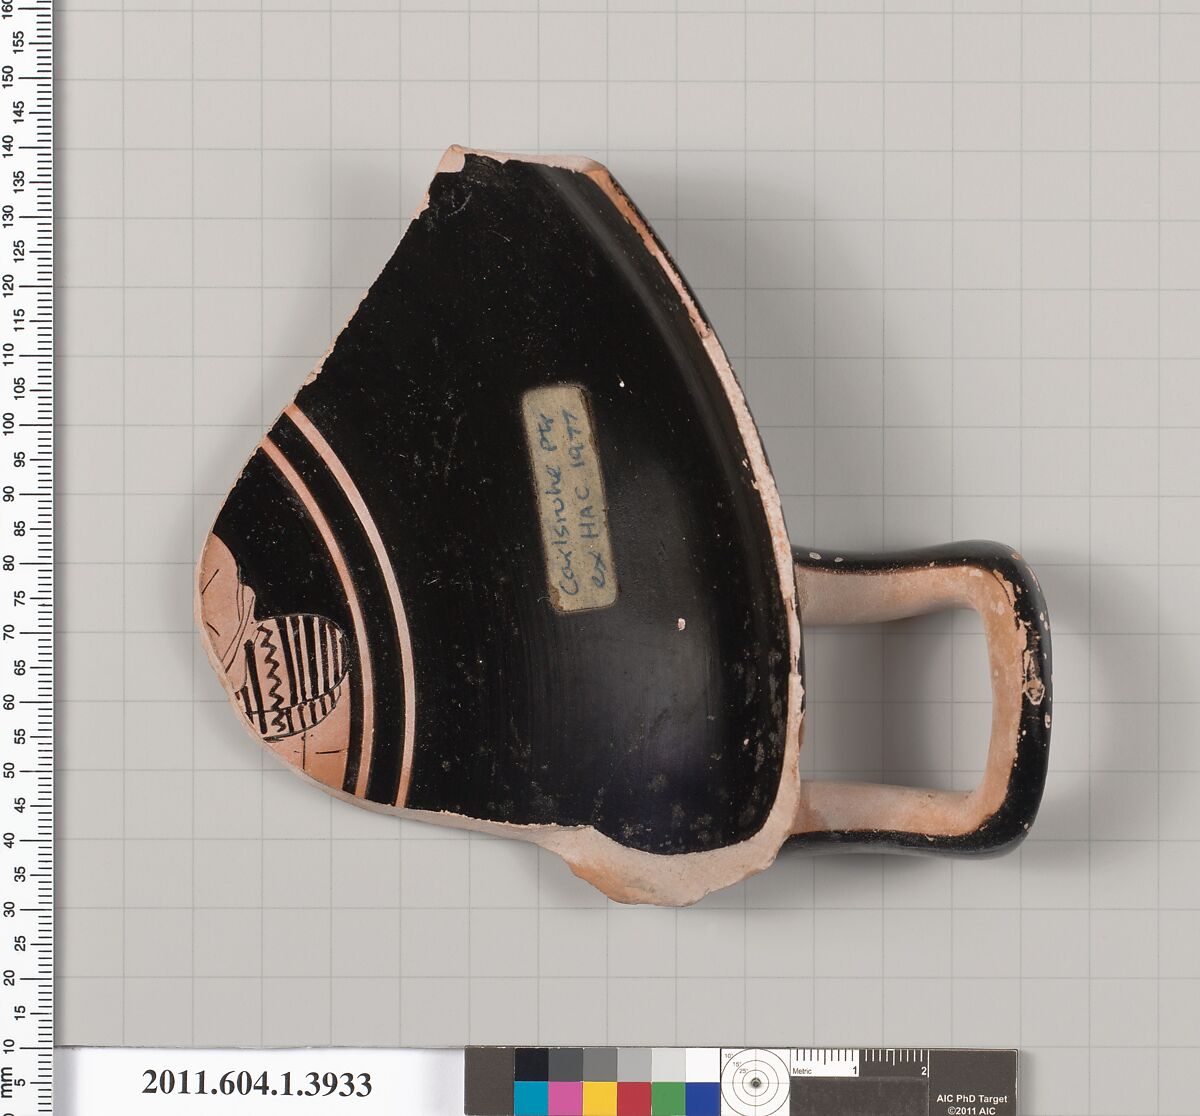 Terracotta fragment of a kylix (drinking cup), Attributed to the Carlsruhe Painter [DvB], Terracotta, Greek, Attic 